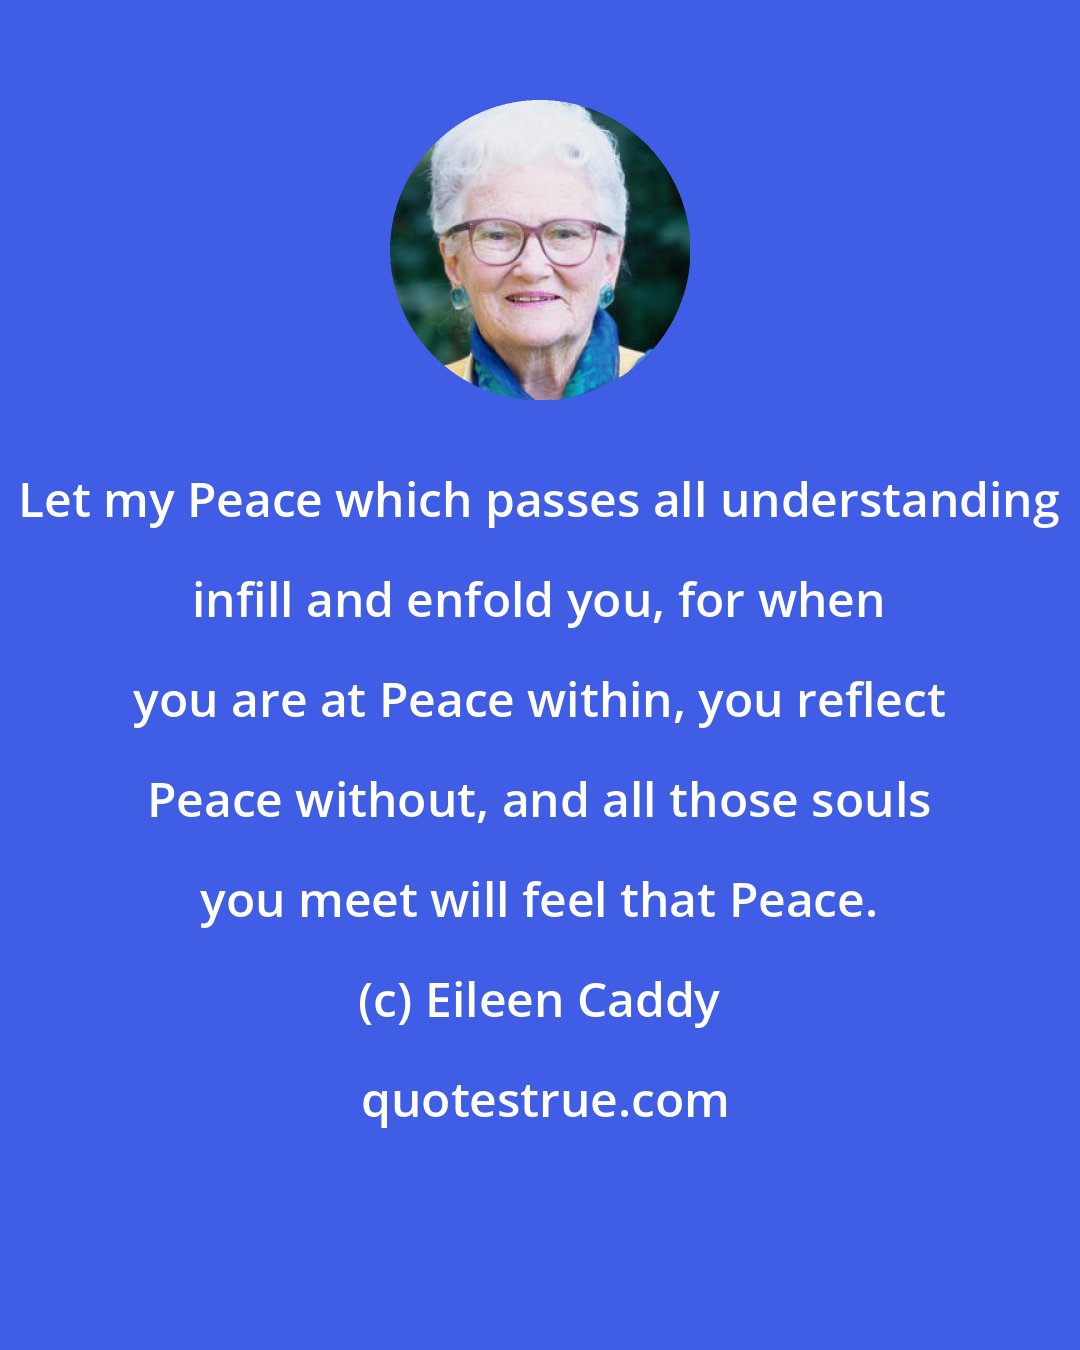 Eileen Caddy: Let my Peace which passes all understanding infill and enfold you, for when you are at Peace within, you reflect Peace without, and all those souls you meet will feel that Peace.